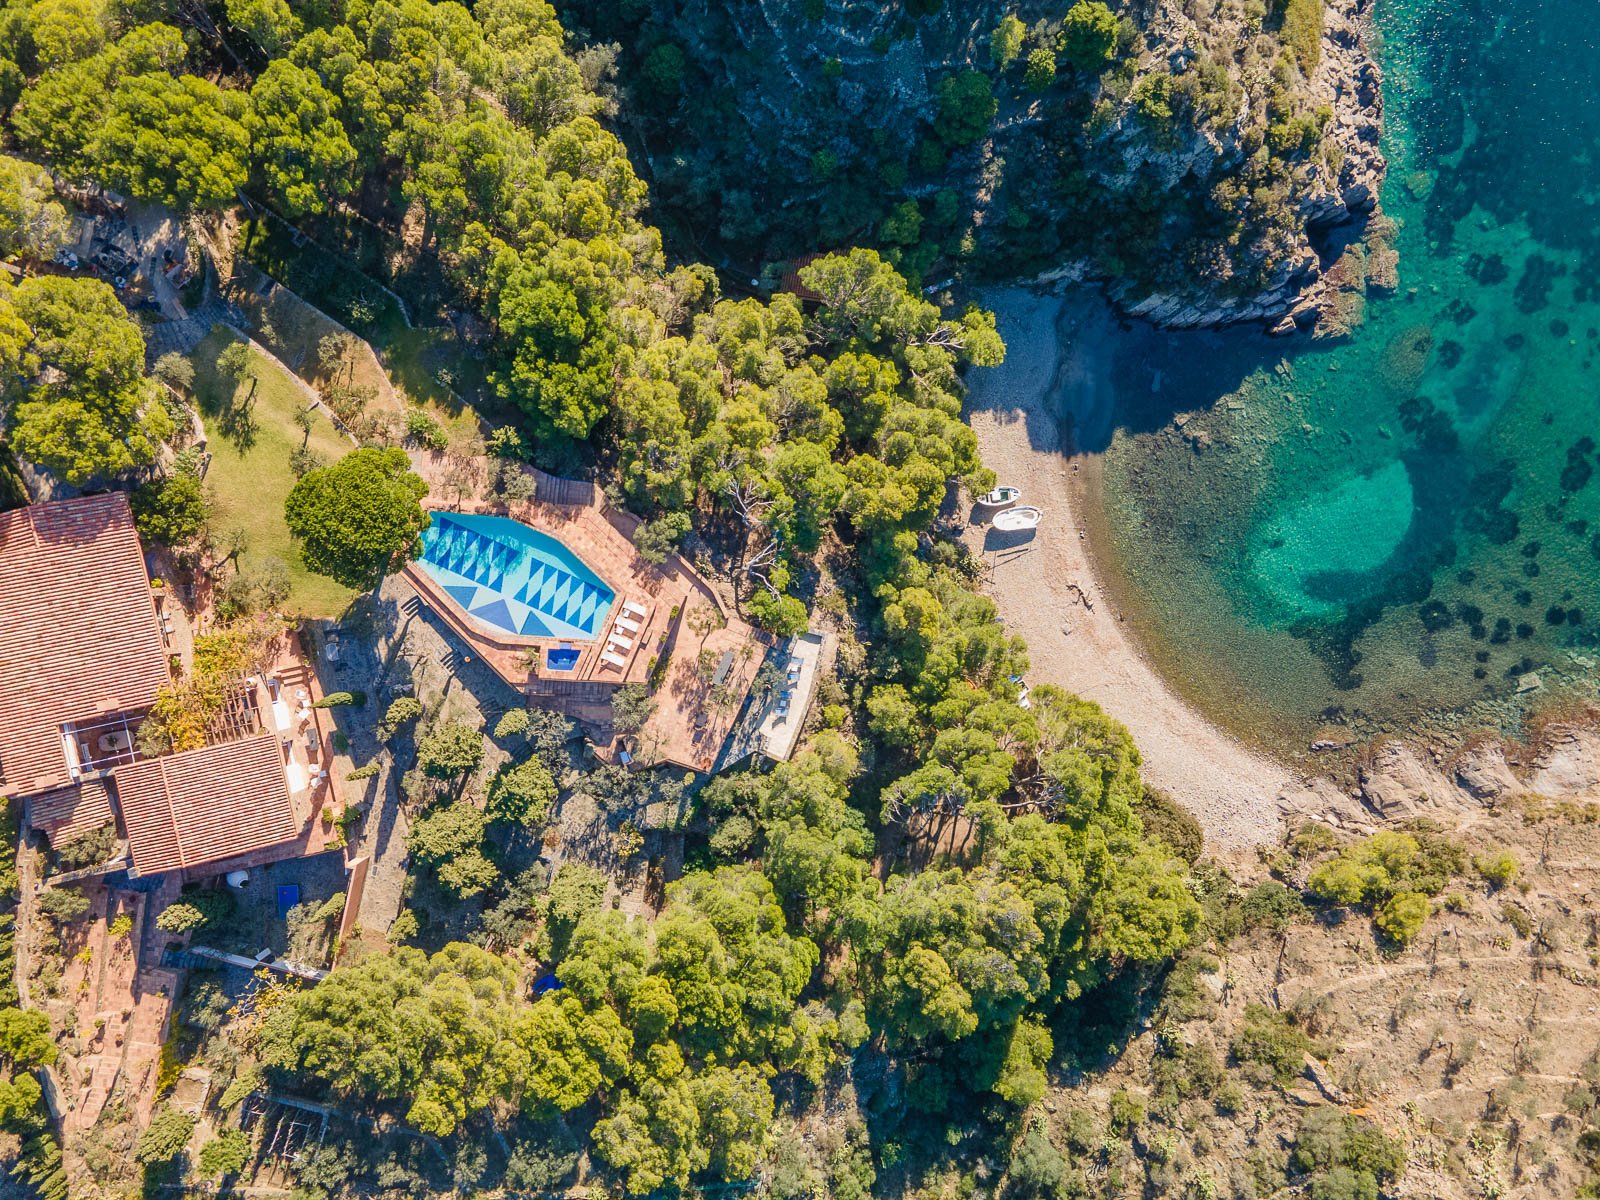 Luxury villa in Cadaqués - drone view of the house and pool